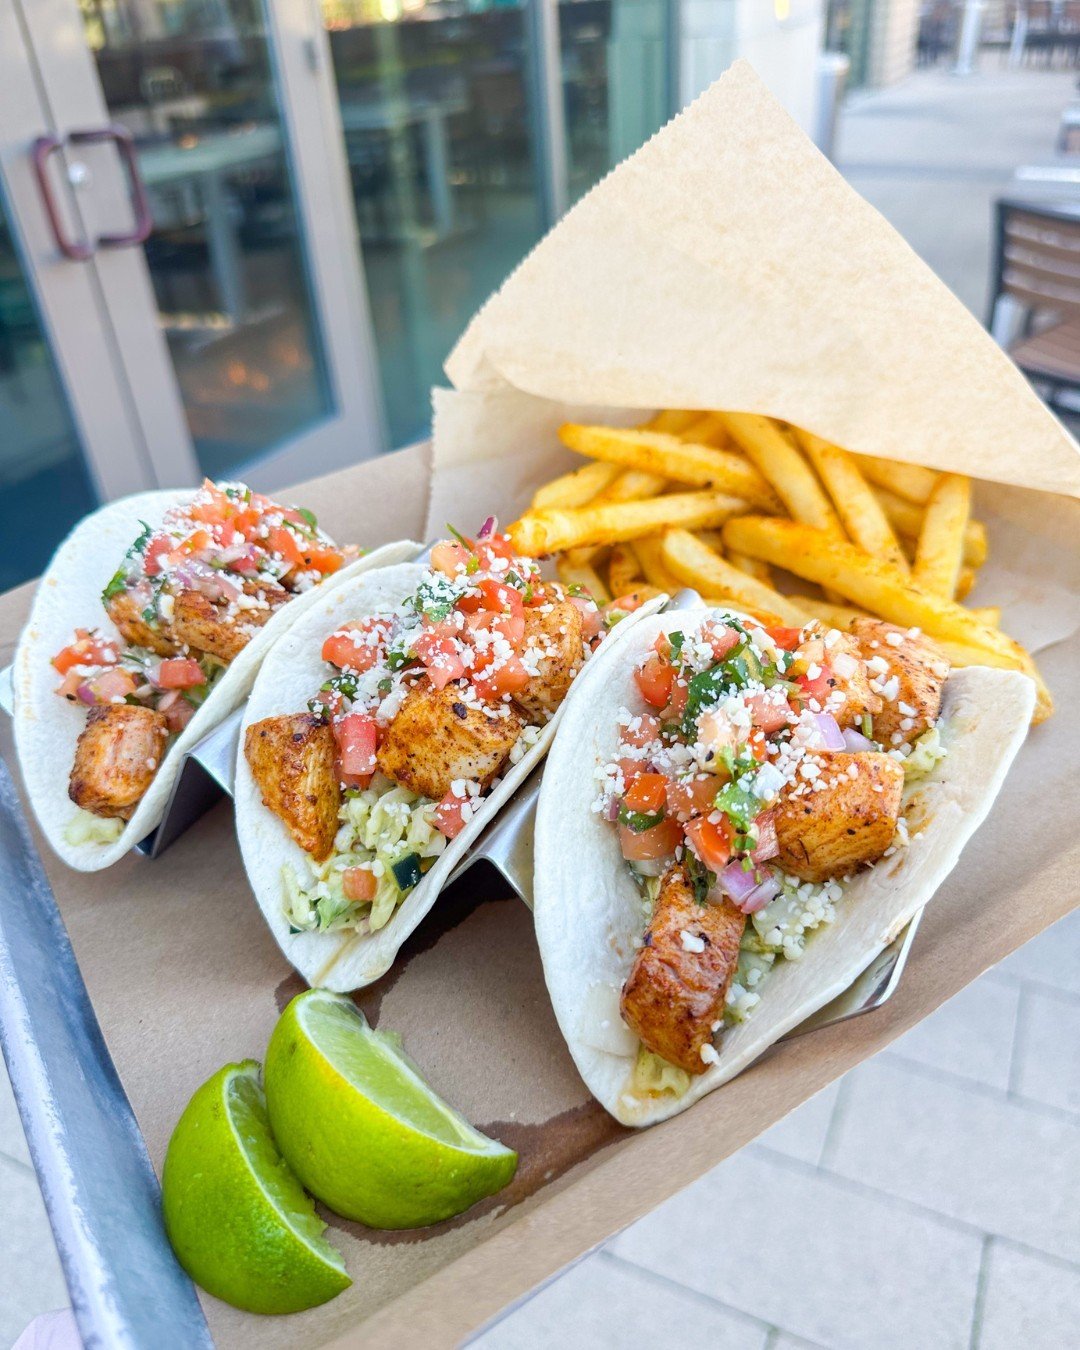 Seafood &amp; Tacos: A Delicious Duo! 🐟️🌮⁠
⁠
Take your pick: blackened shrimp or mahi, tucked into tortillas with creamy avocado slaw, cheese, and fresh pico. It's a best seller for a reason!⁠
⁠
Dine in or order online today! Link in bio.⁠
-⁠
-⁠
-⁠